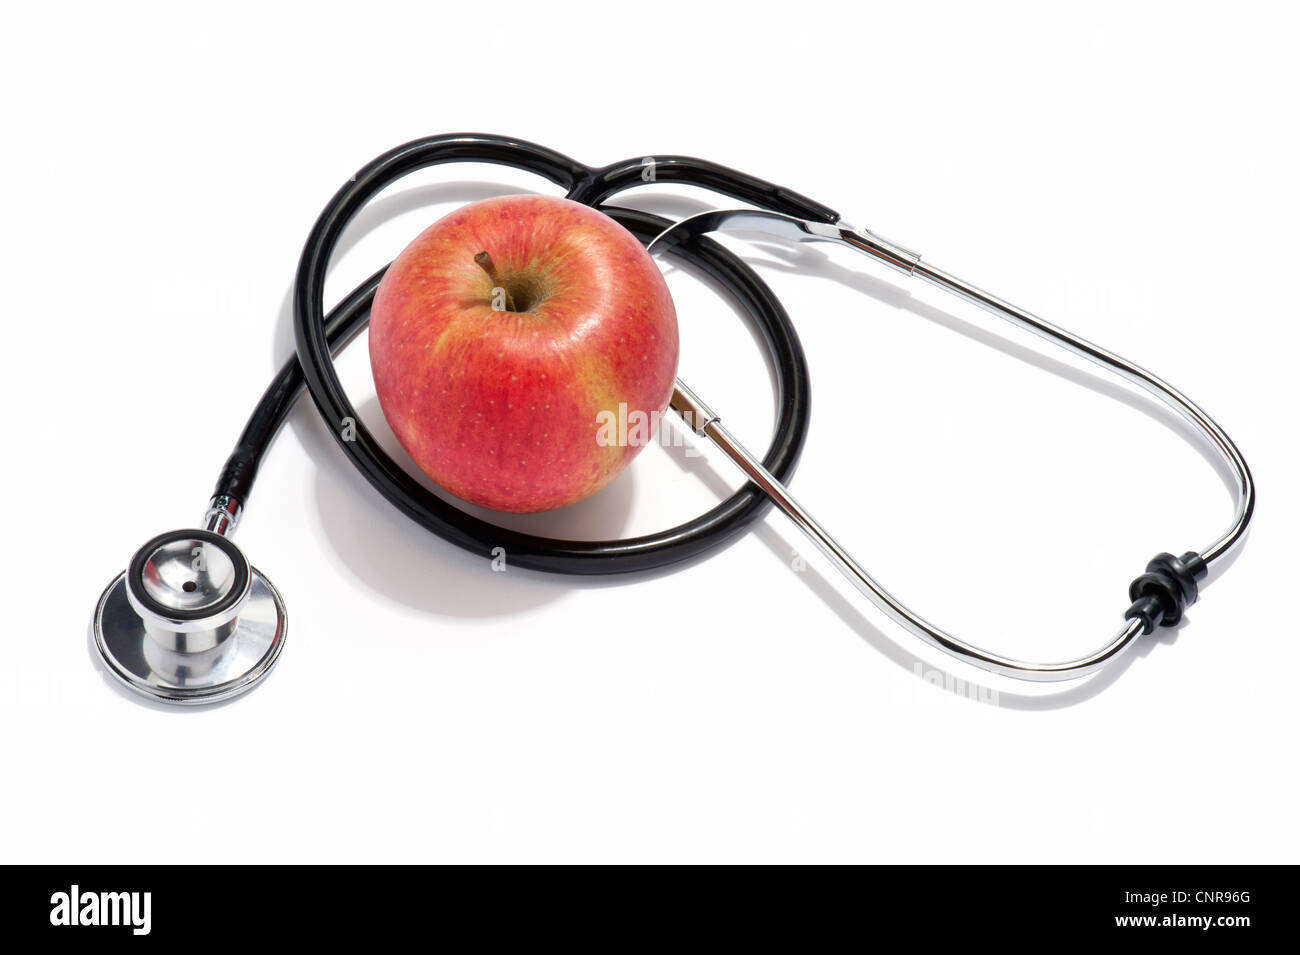 A doctors stethoscope and a red apple Stock Photo